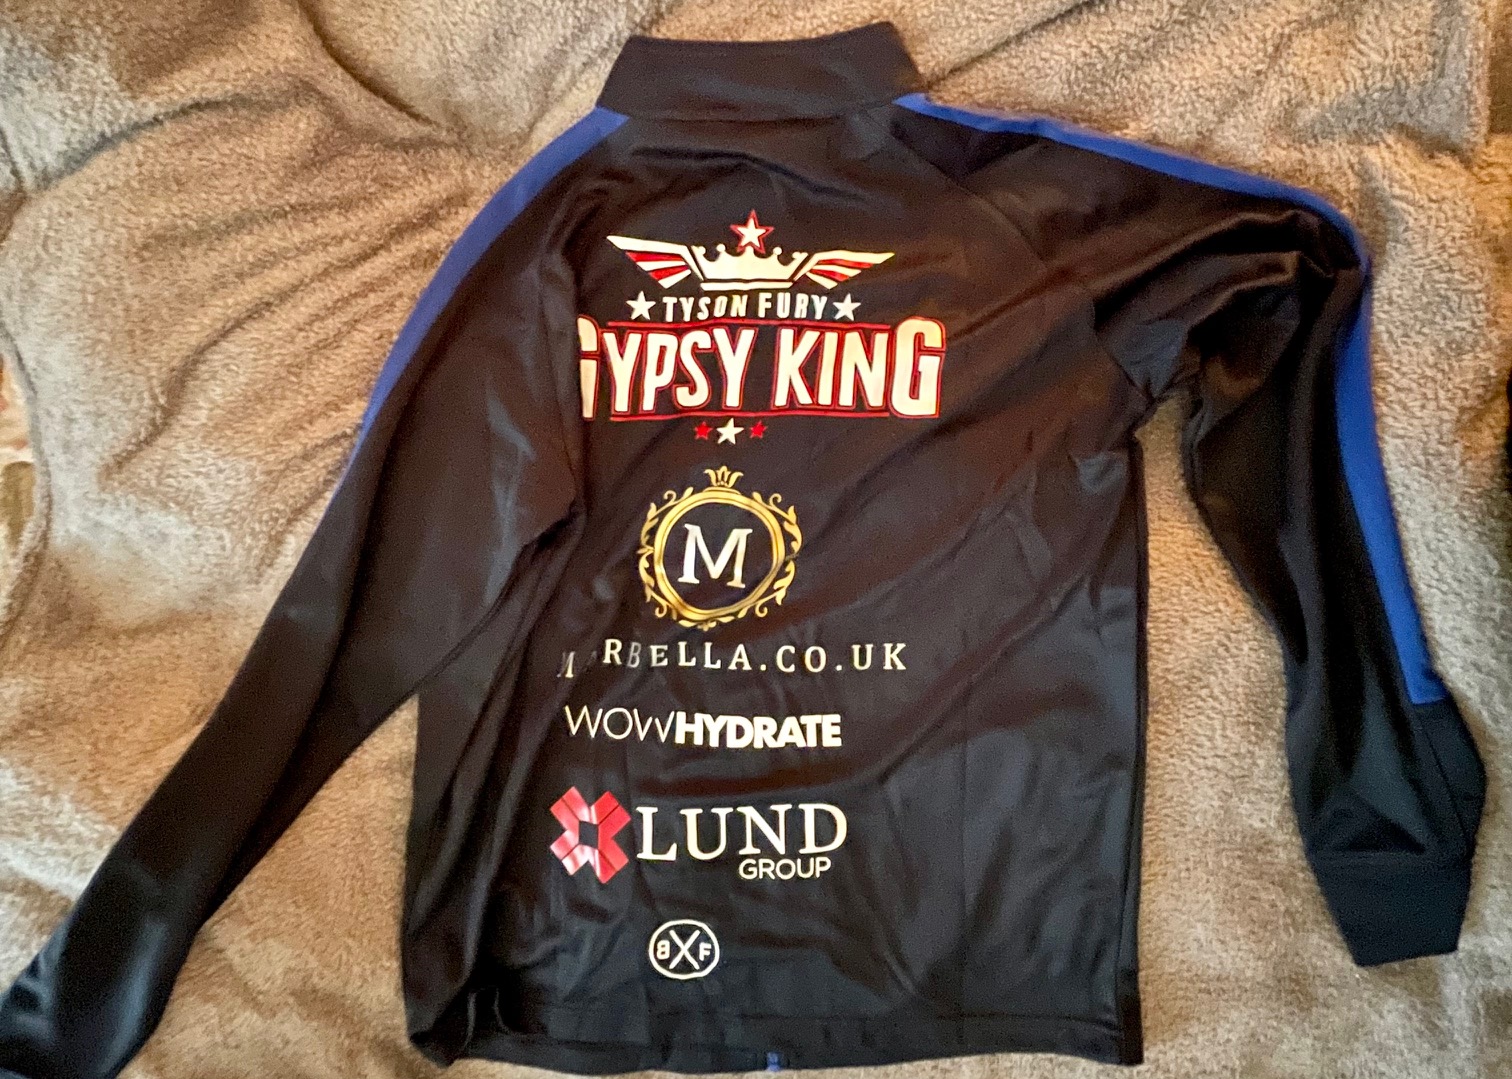 Tyson Fury navy & blue pre-fight tracksuit worn for the Deontay Wilder I fight held at Staples - Image 3 of 3